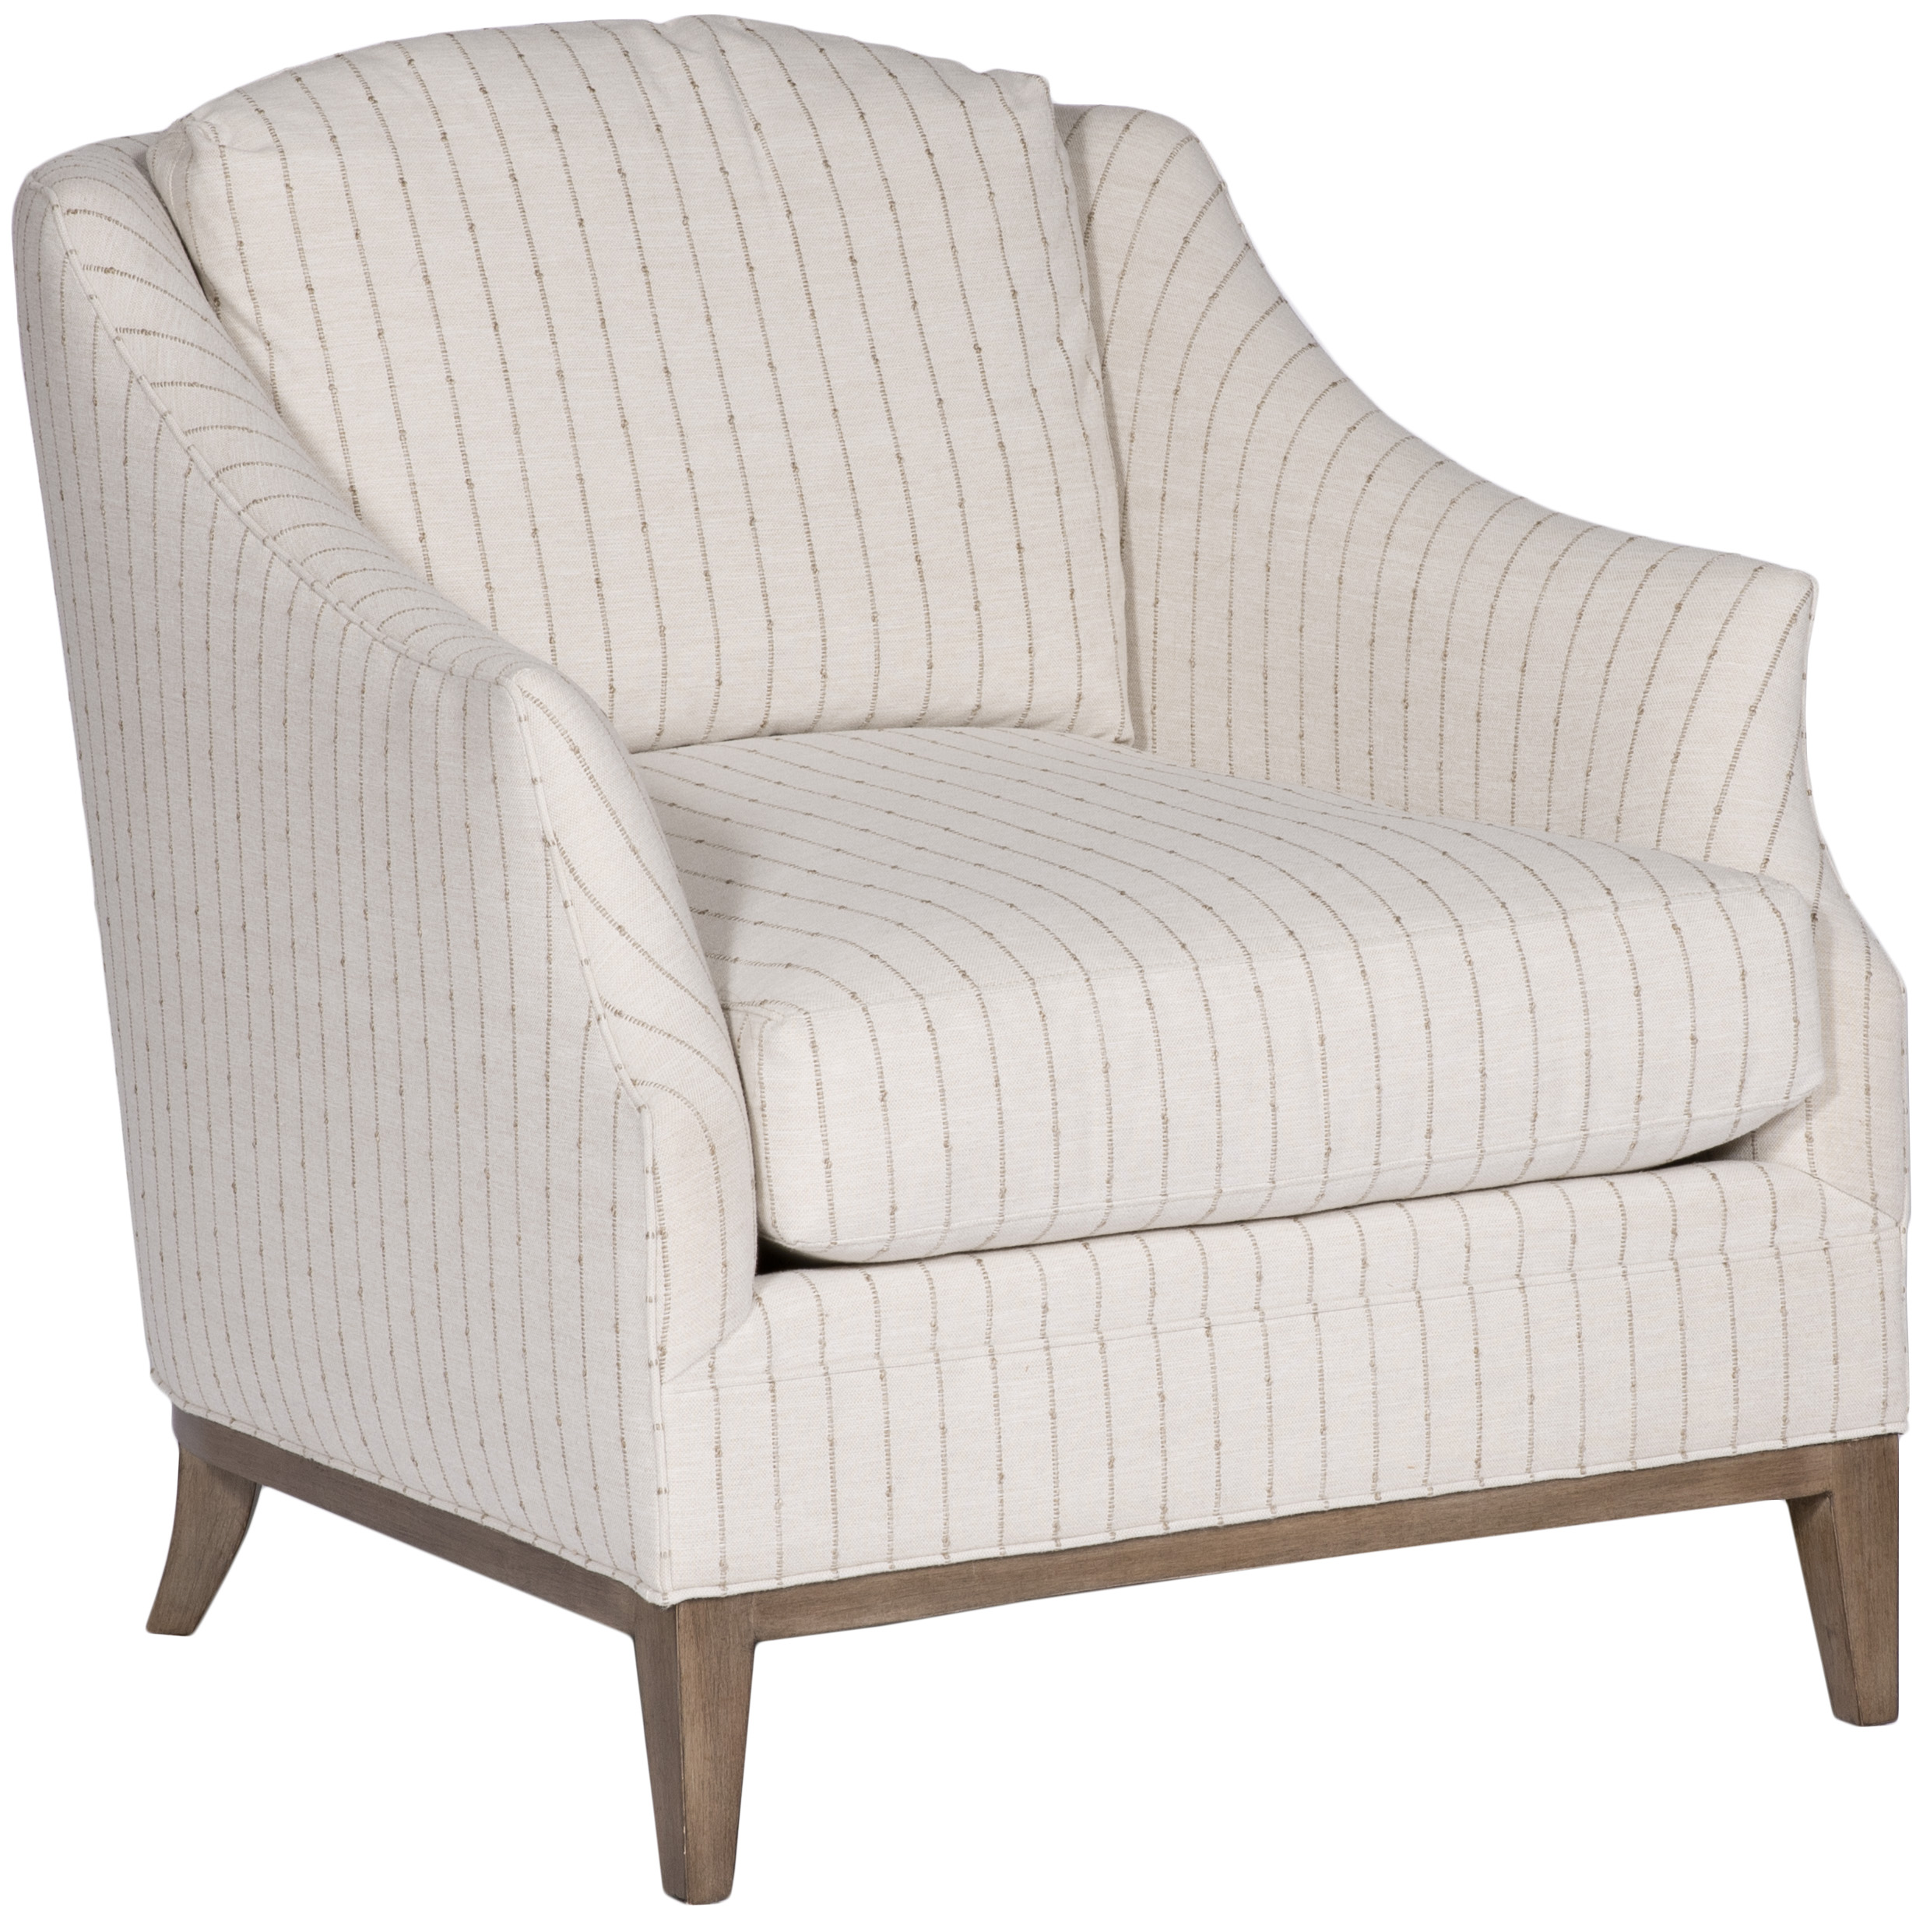 Fiora Chair V955-CH - Our Products - Vanguard Furniture